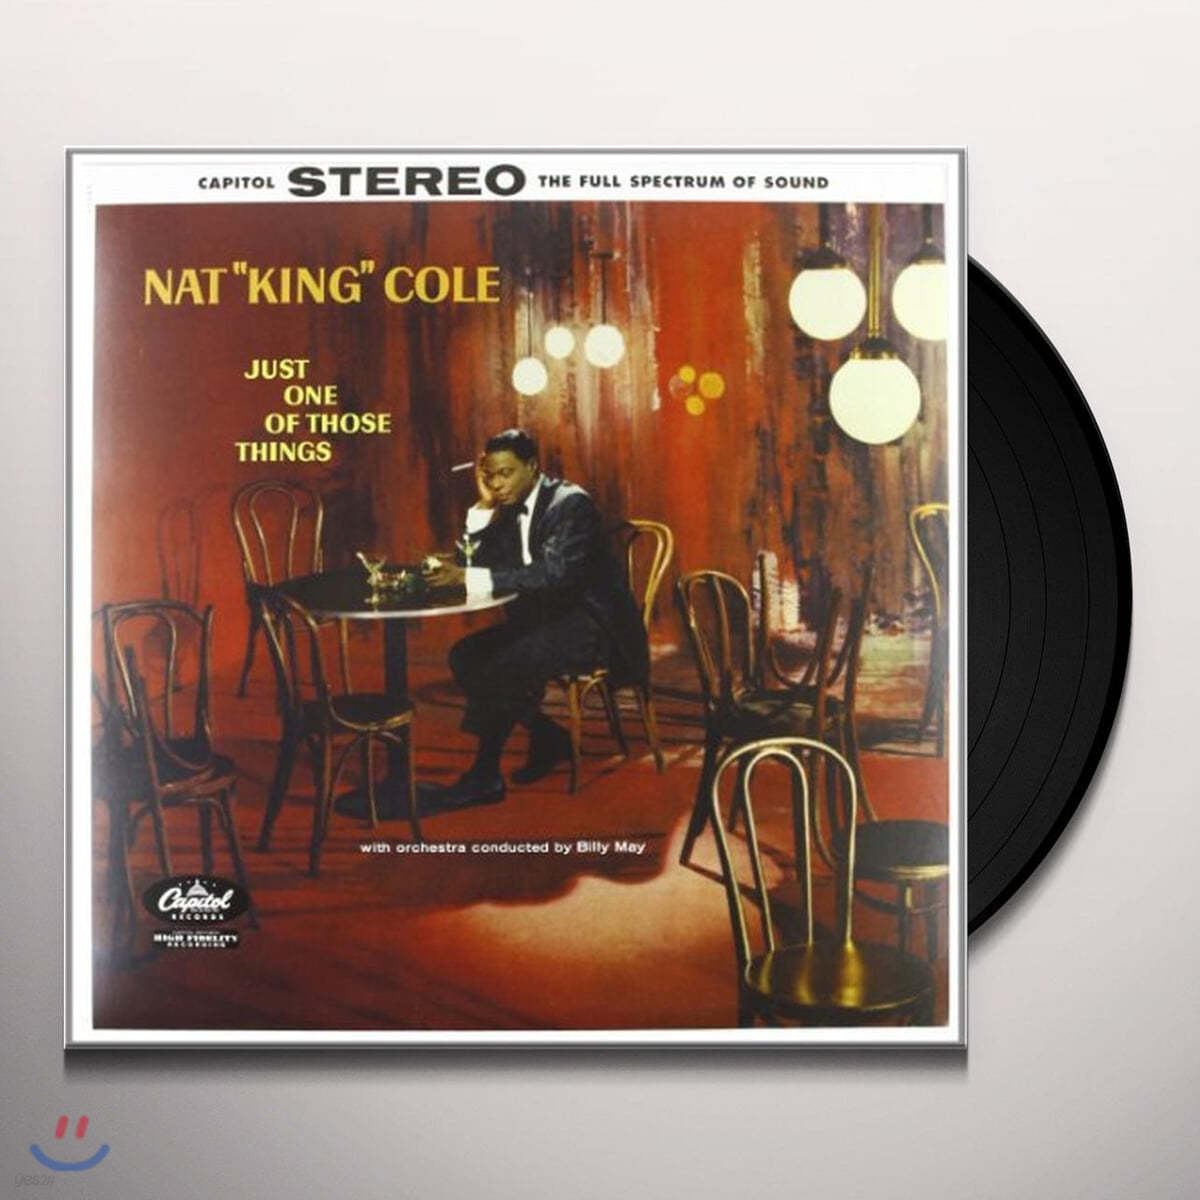 Nat King Cole (냇 킹 콜) - Just One of Those Things [2LP]